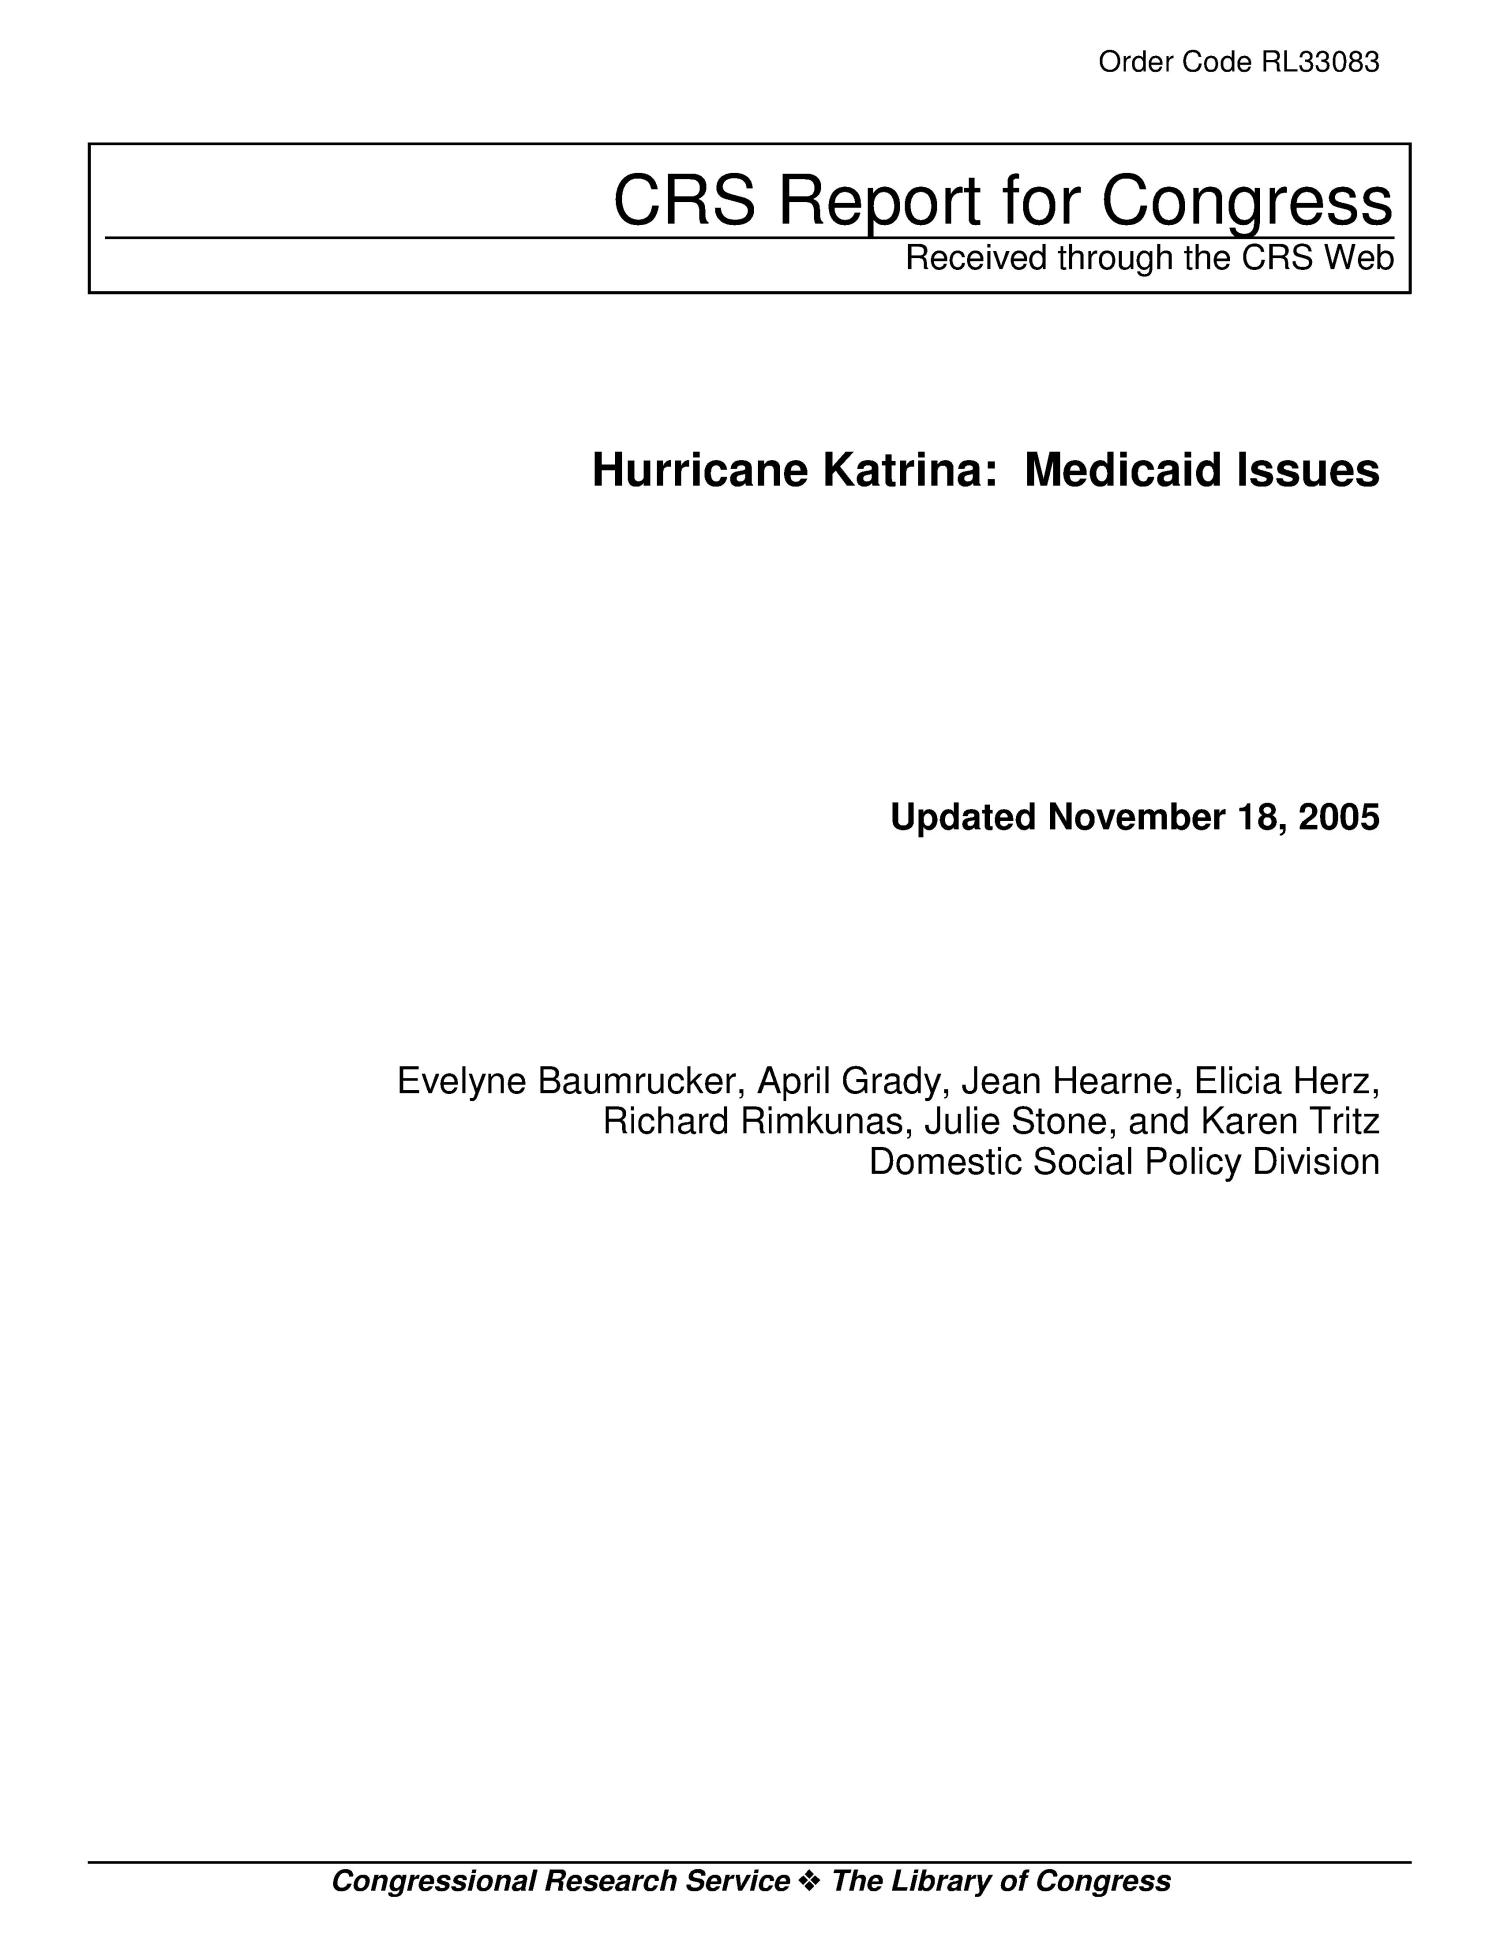 Hurricane Katrina: Medicaid Issues
                                                
                                                    [Sequence #]: 1 of 34
                                                